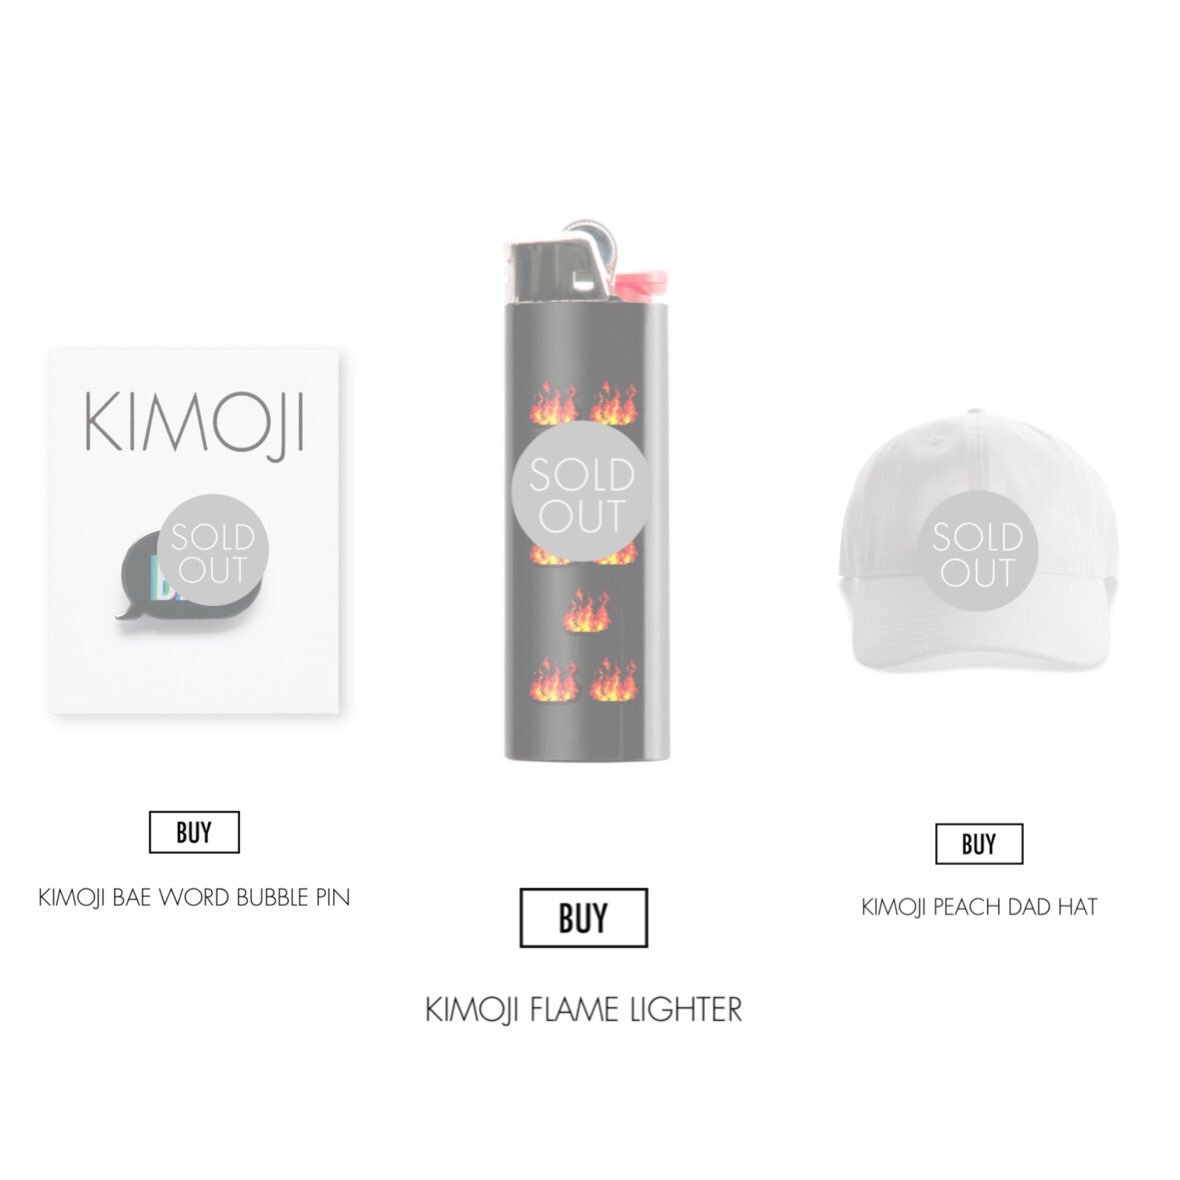 RT @KimKanyeKimYeFC: Already some SOLD OUT items on the #KimojiMerch store so hurry up & get your shop on. 
https://t.co/TJ94GzsCVA https:/…